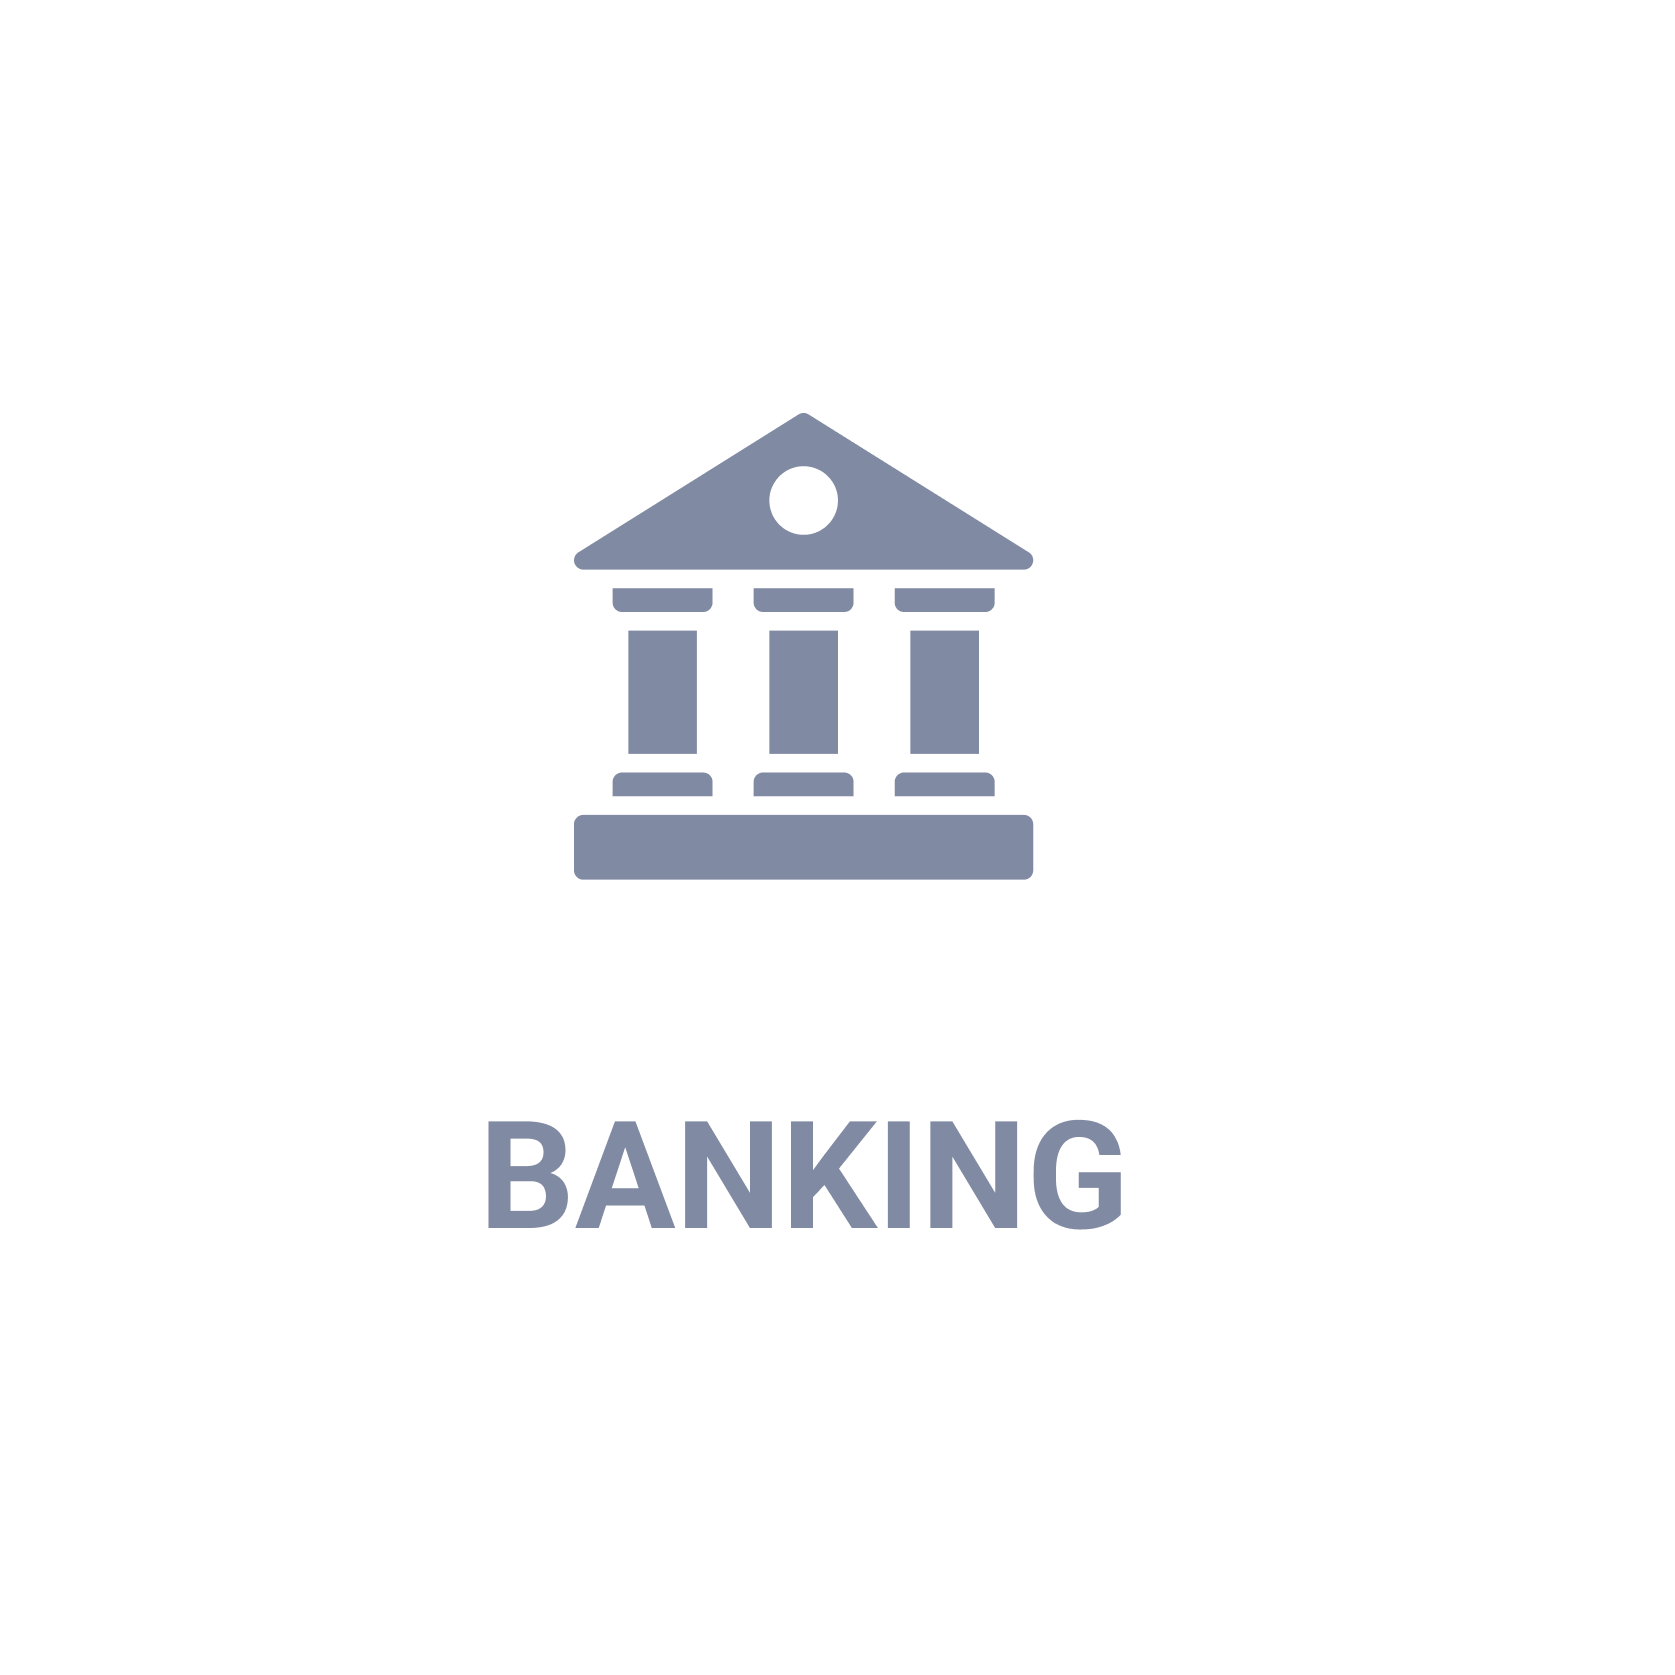 Security consulting - Banking icon